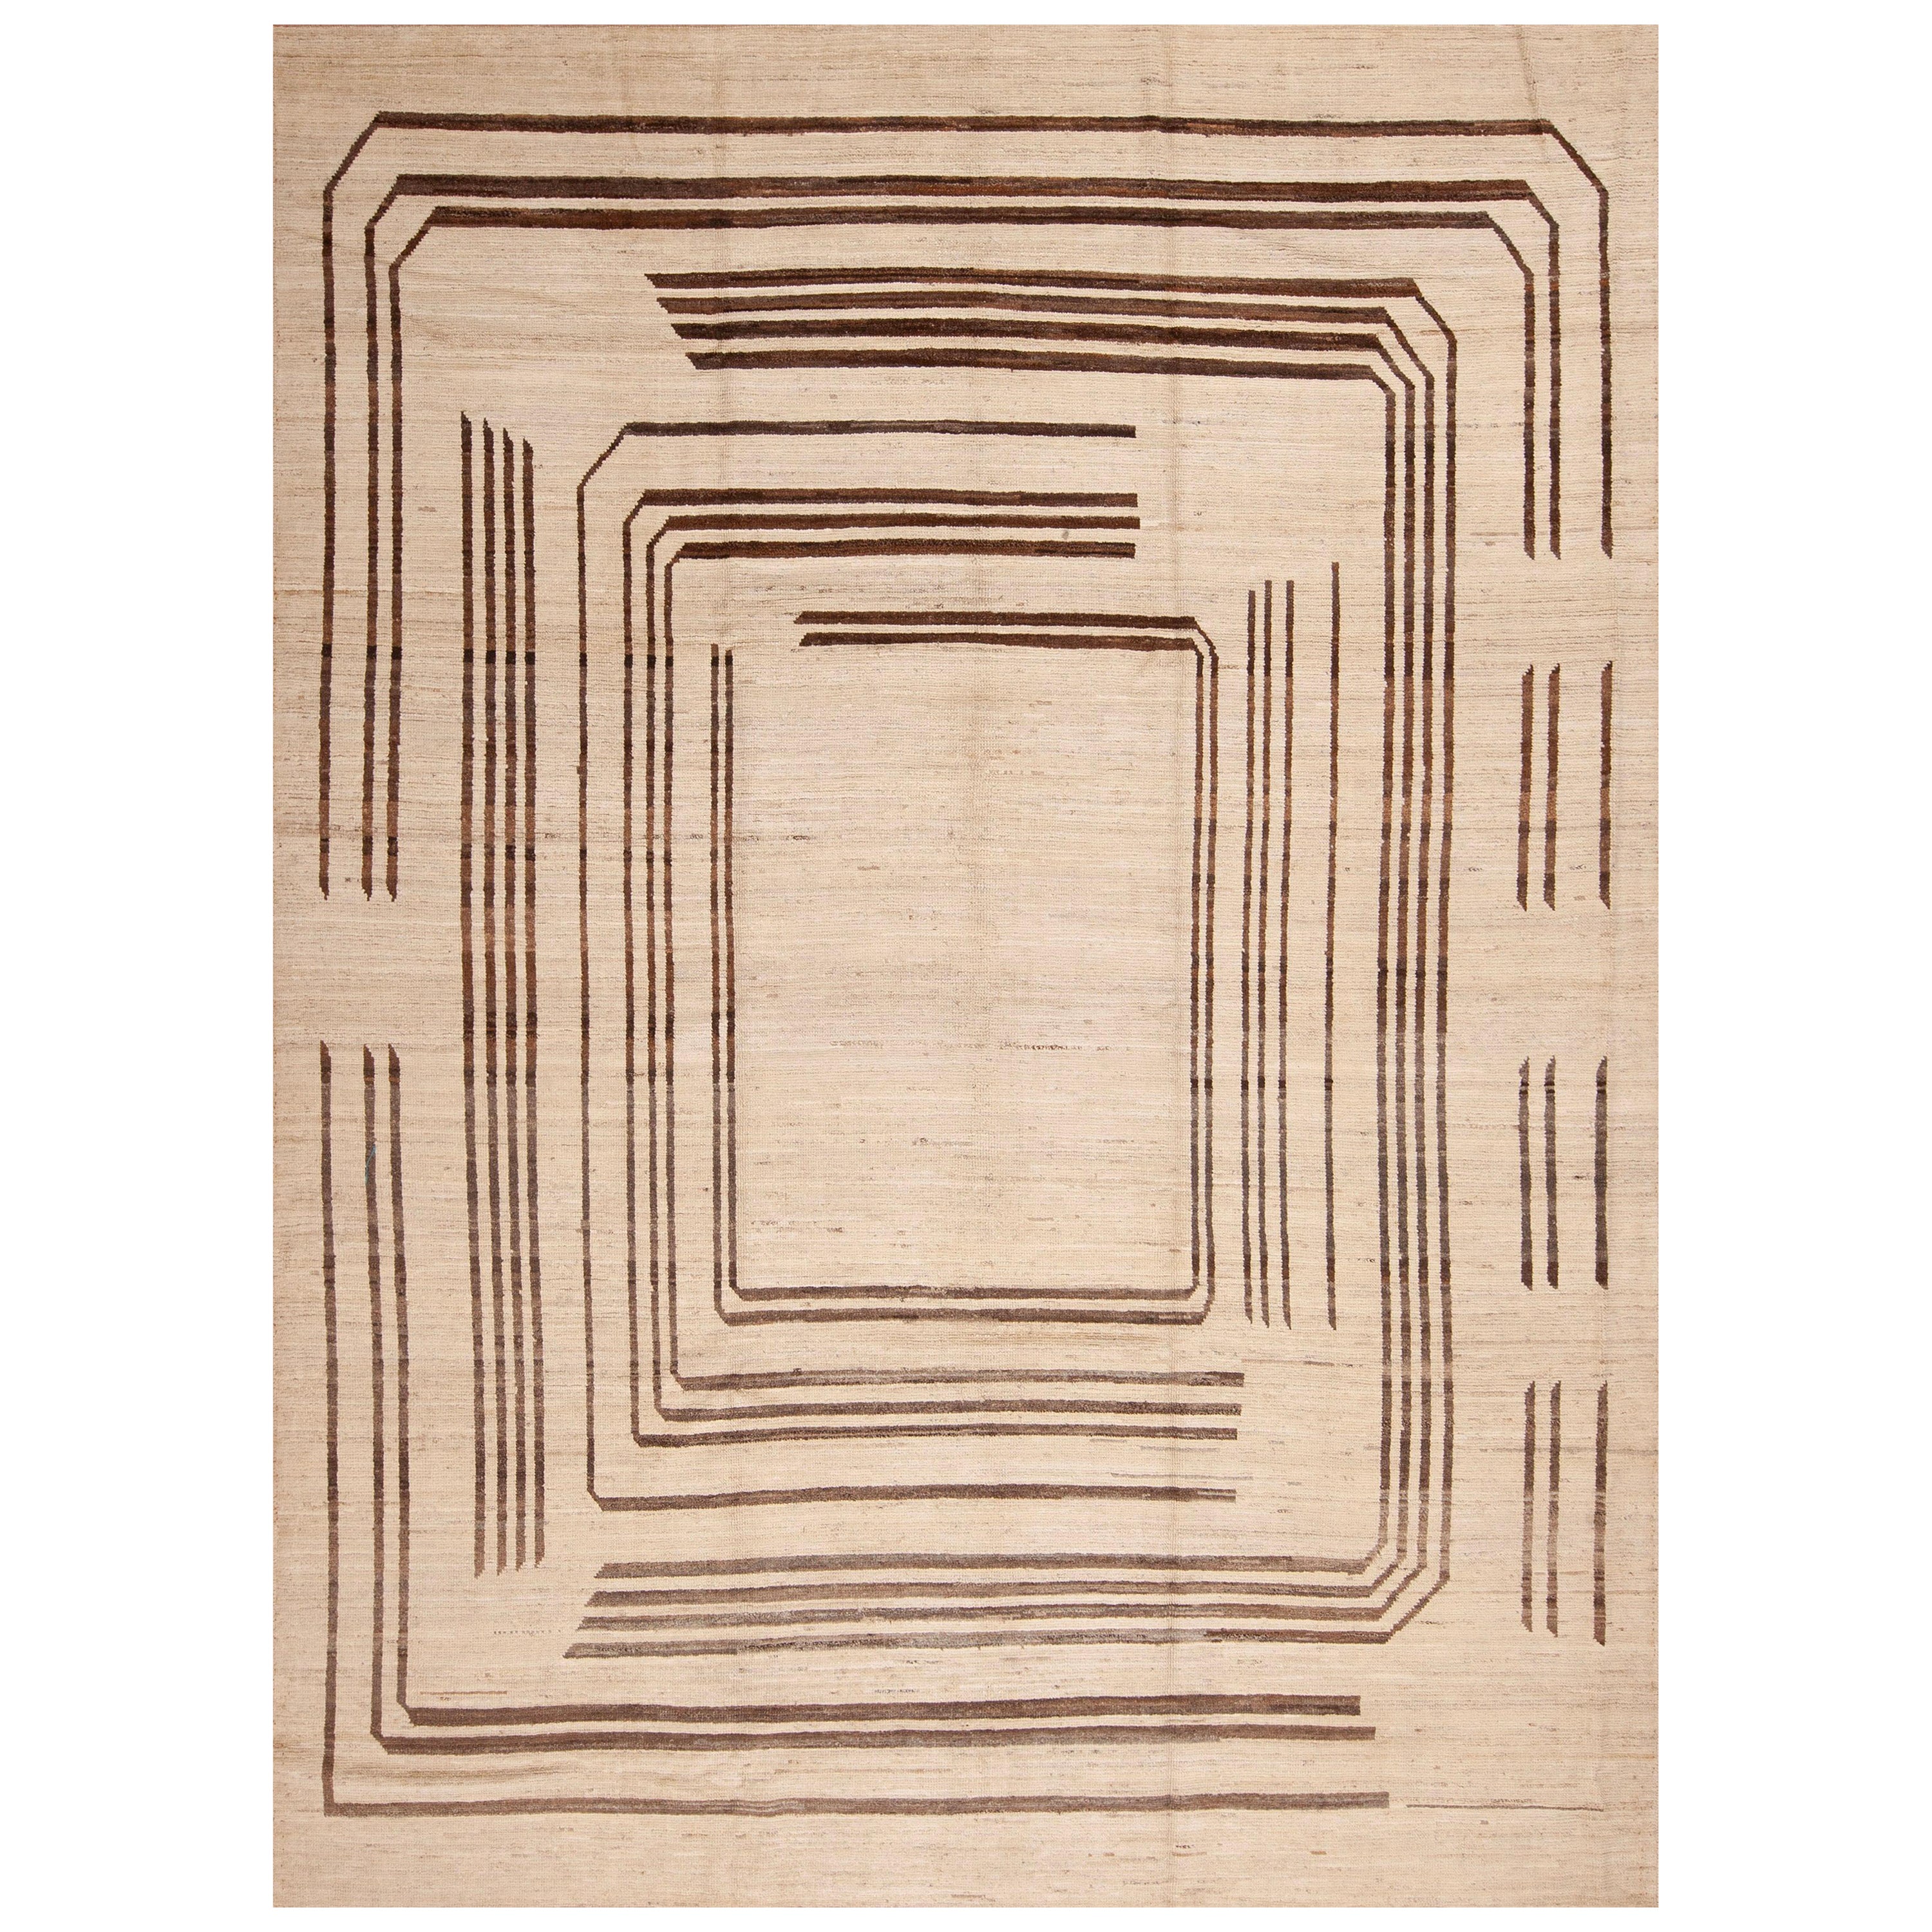 Nazmiyal Collection Geometric Square Modern Room Size Area Rug 8'7" x 11'9"